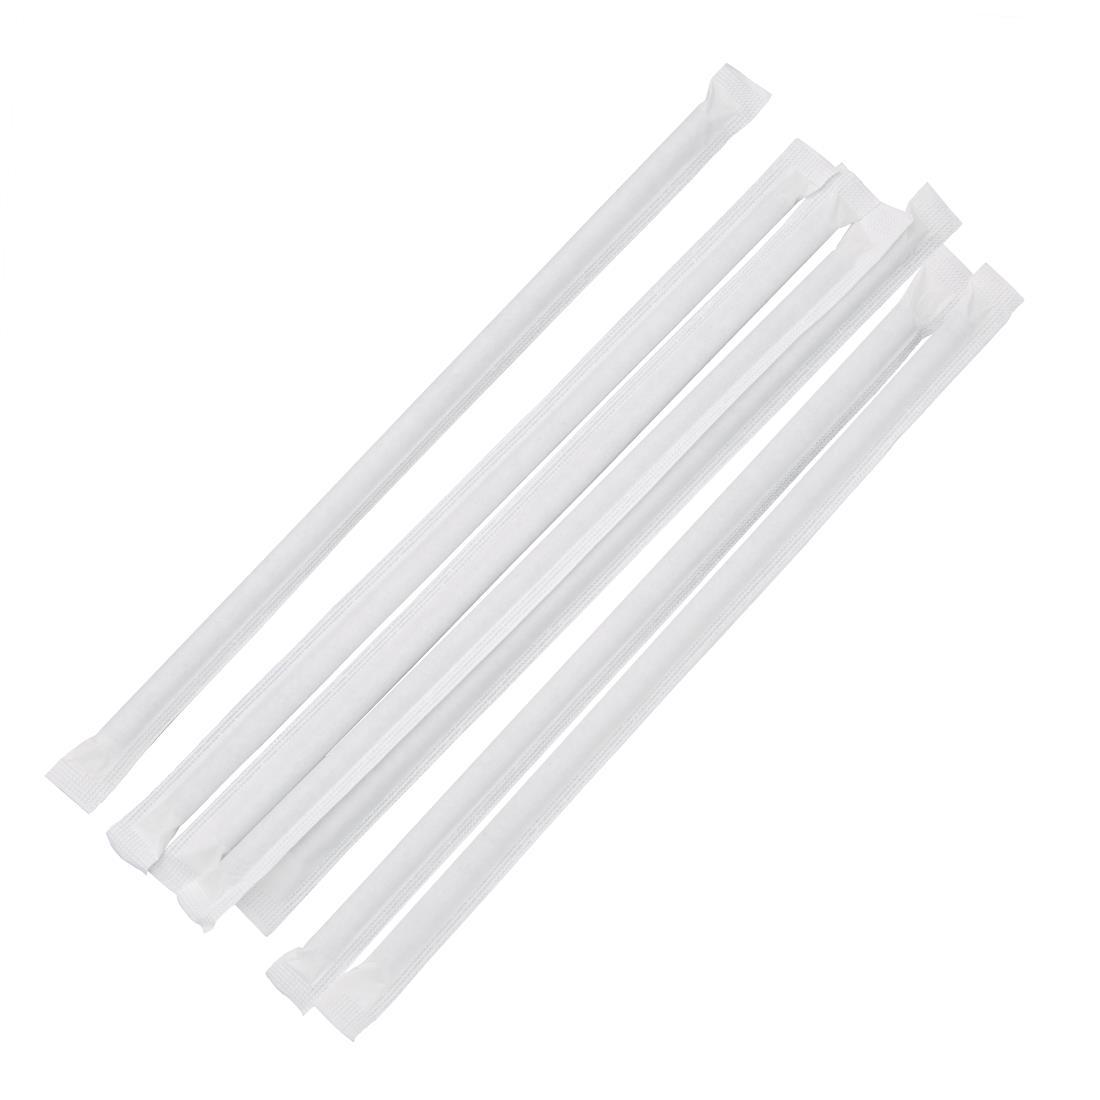 Fiesta Compostable Individually Wrapped Paper Straws Black (Pack of 250) - FP440  - 5